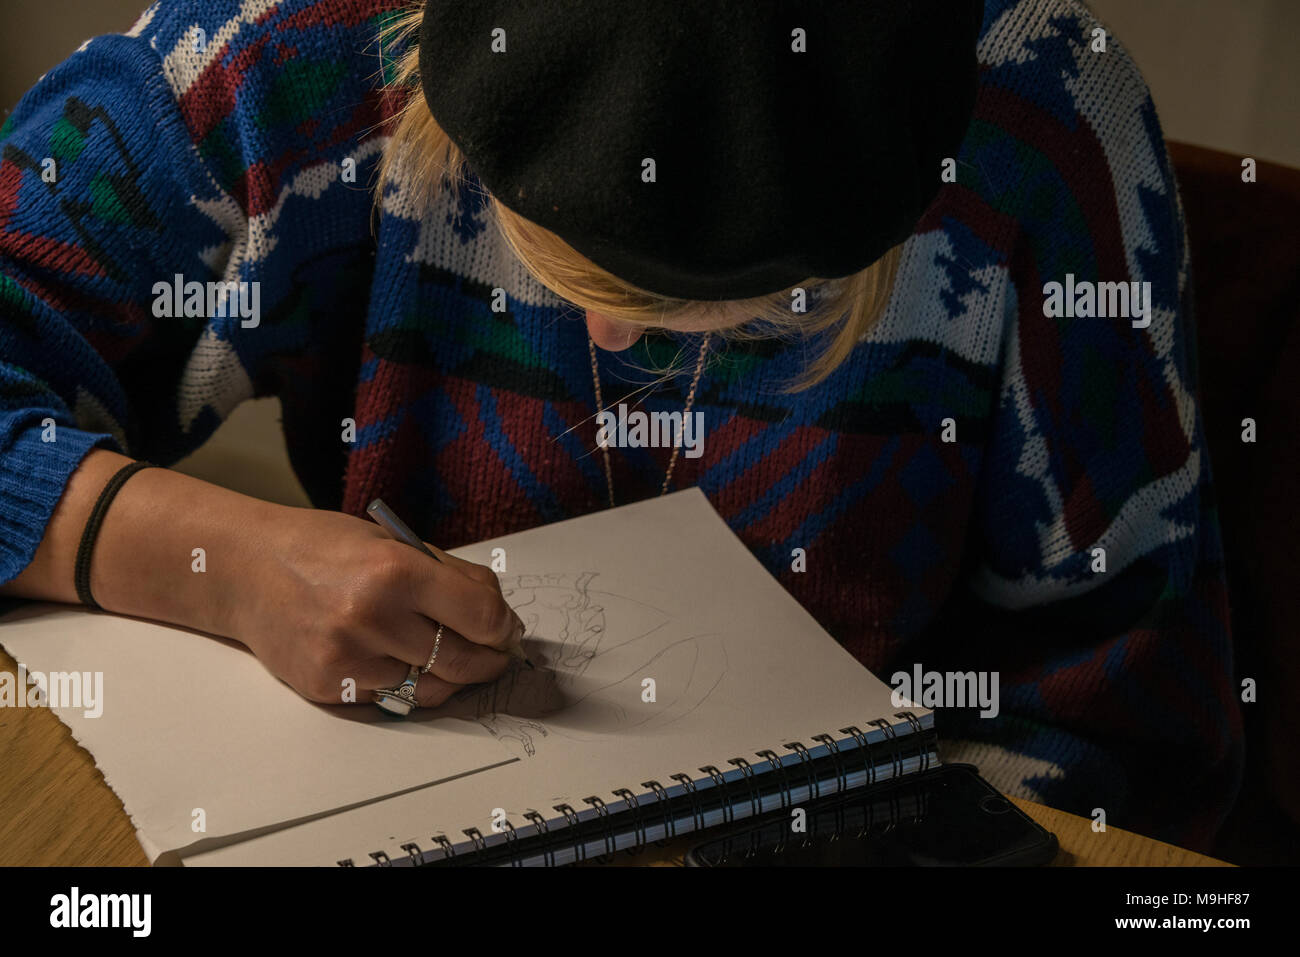 Woman wearing a beret, sketching on an art pad. Stock Photo